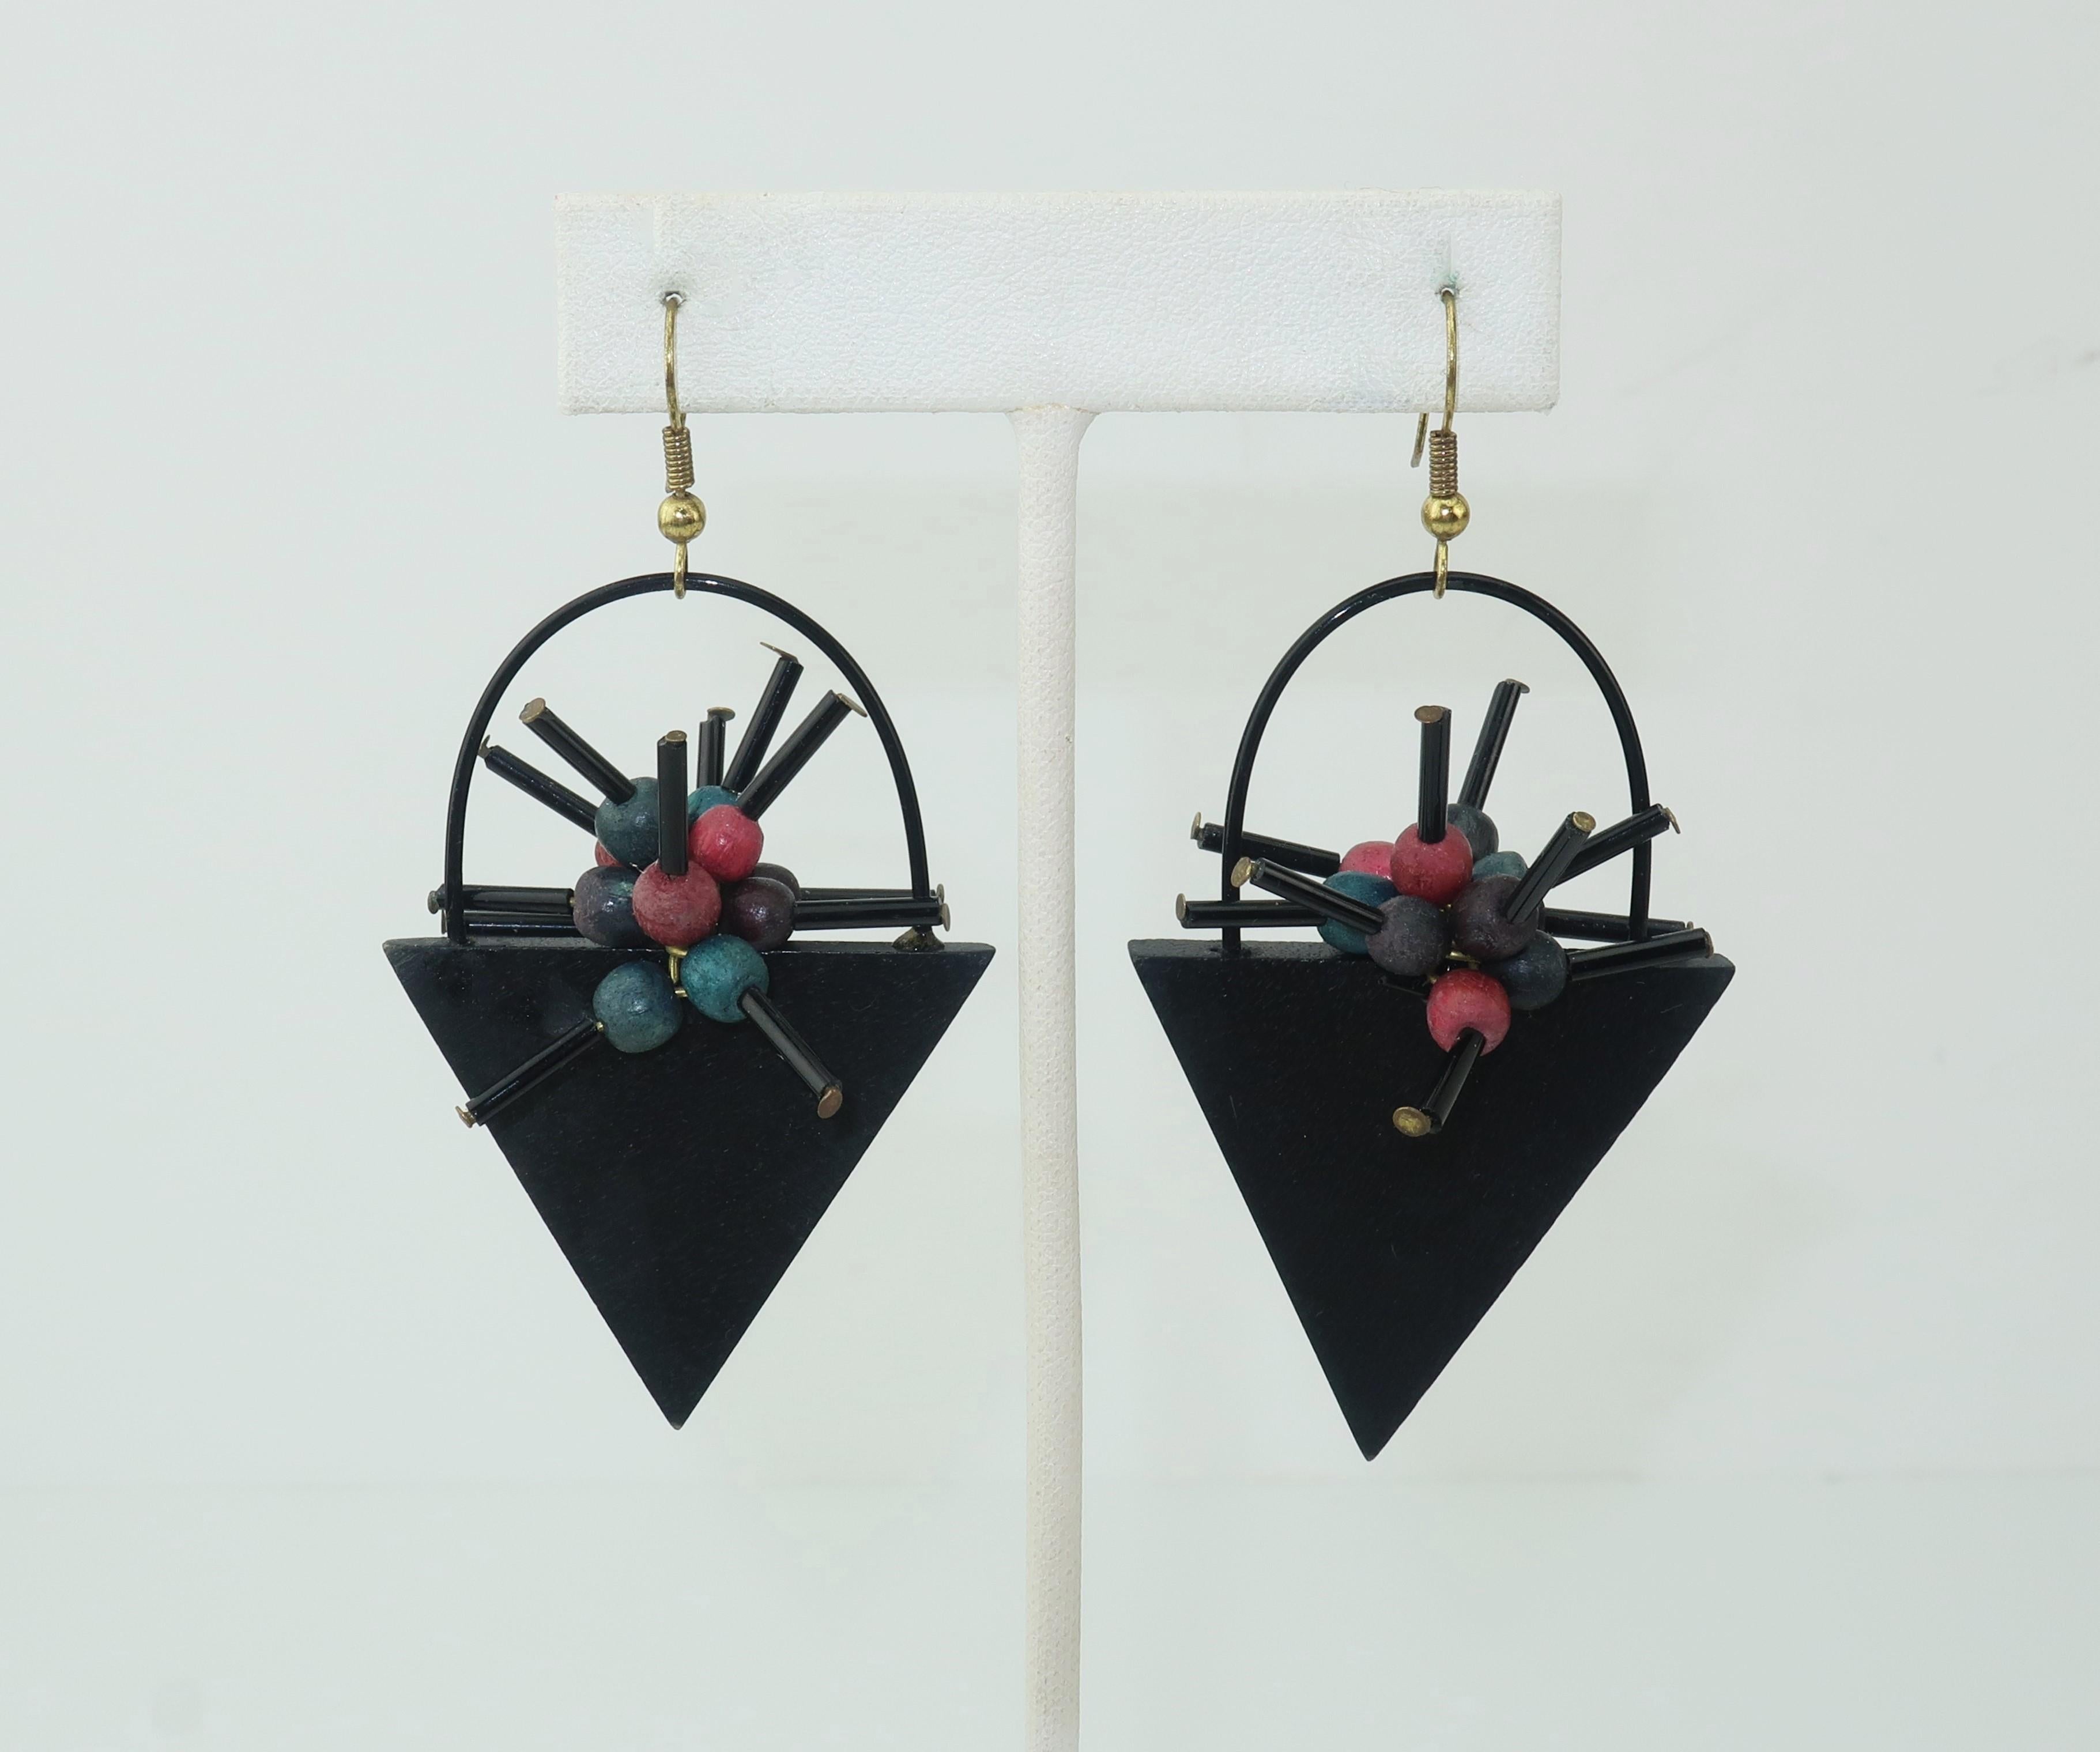 1980’s Memphis style geometric wood earrings with an atomic looking motif akin to a basket of cubist flowers.  The body of the earrings are constructed from a sculptural combination of lightweight wood in black and muted shades of peacock blue, red